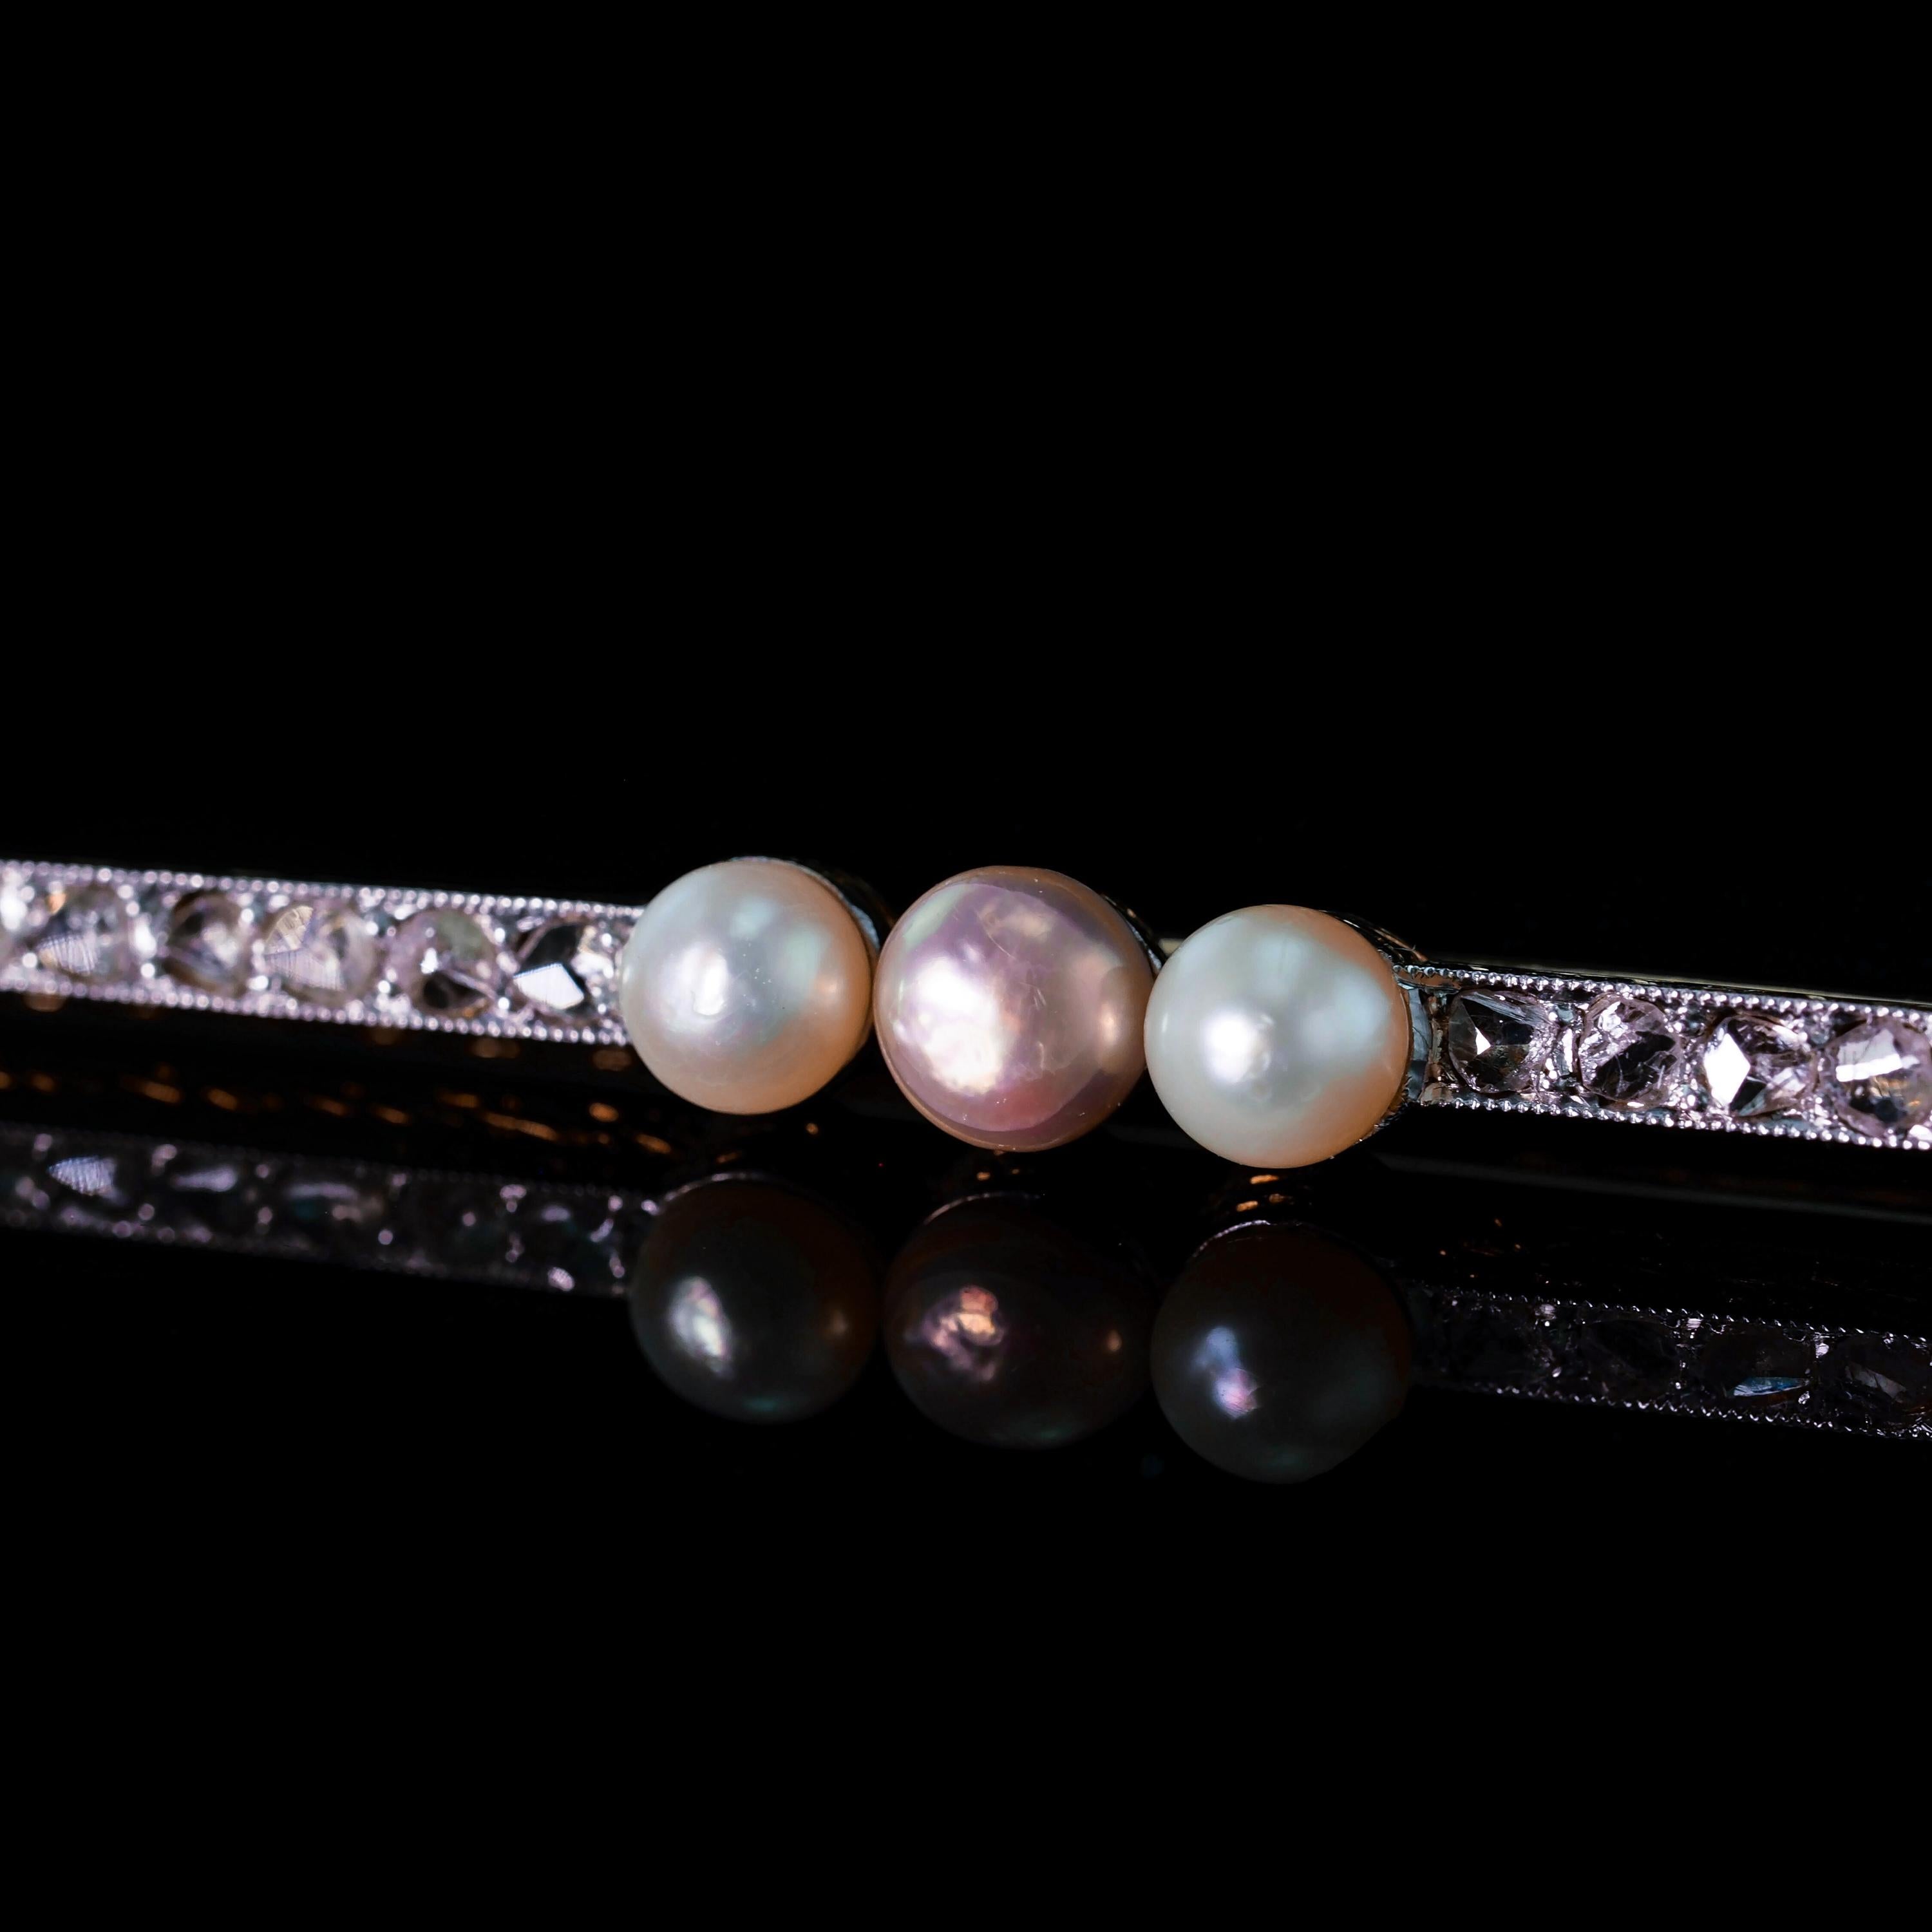 Antique 18ct Gold & Platinum Pink Pearl & Diamond Brooch - c.1920 For Sale 4